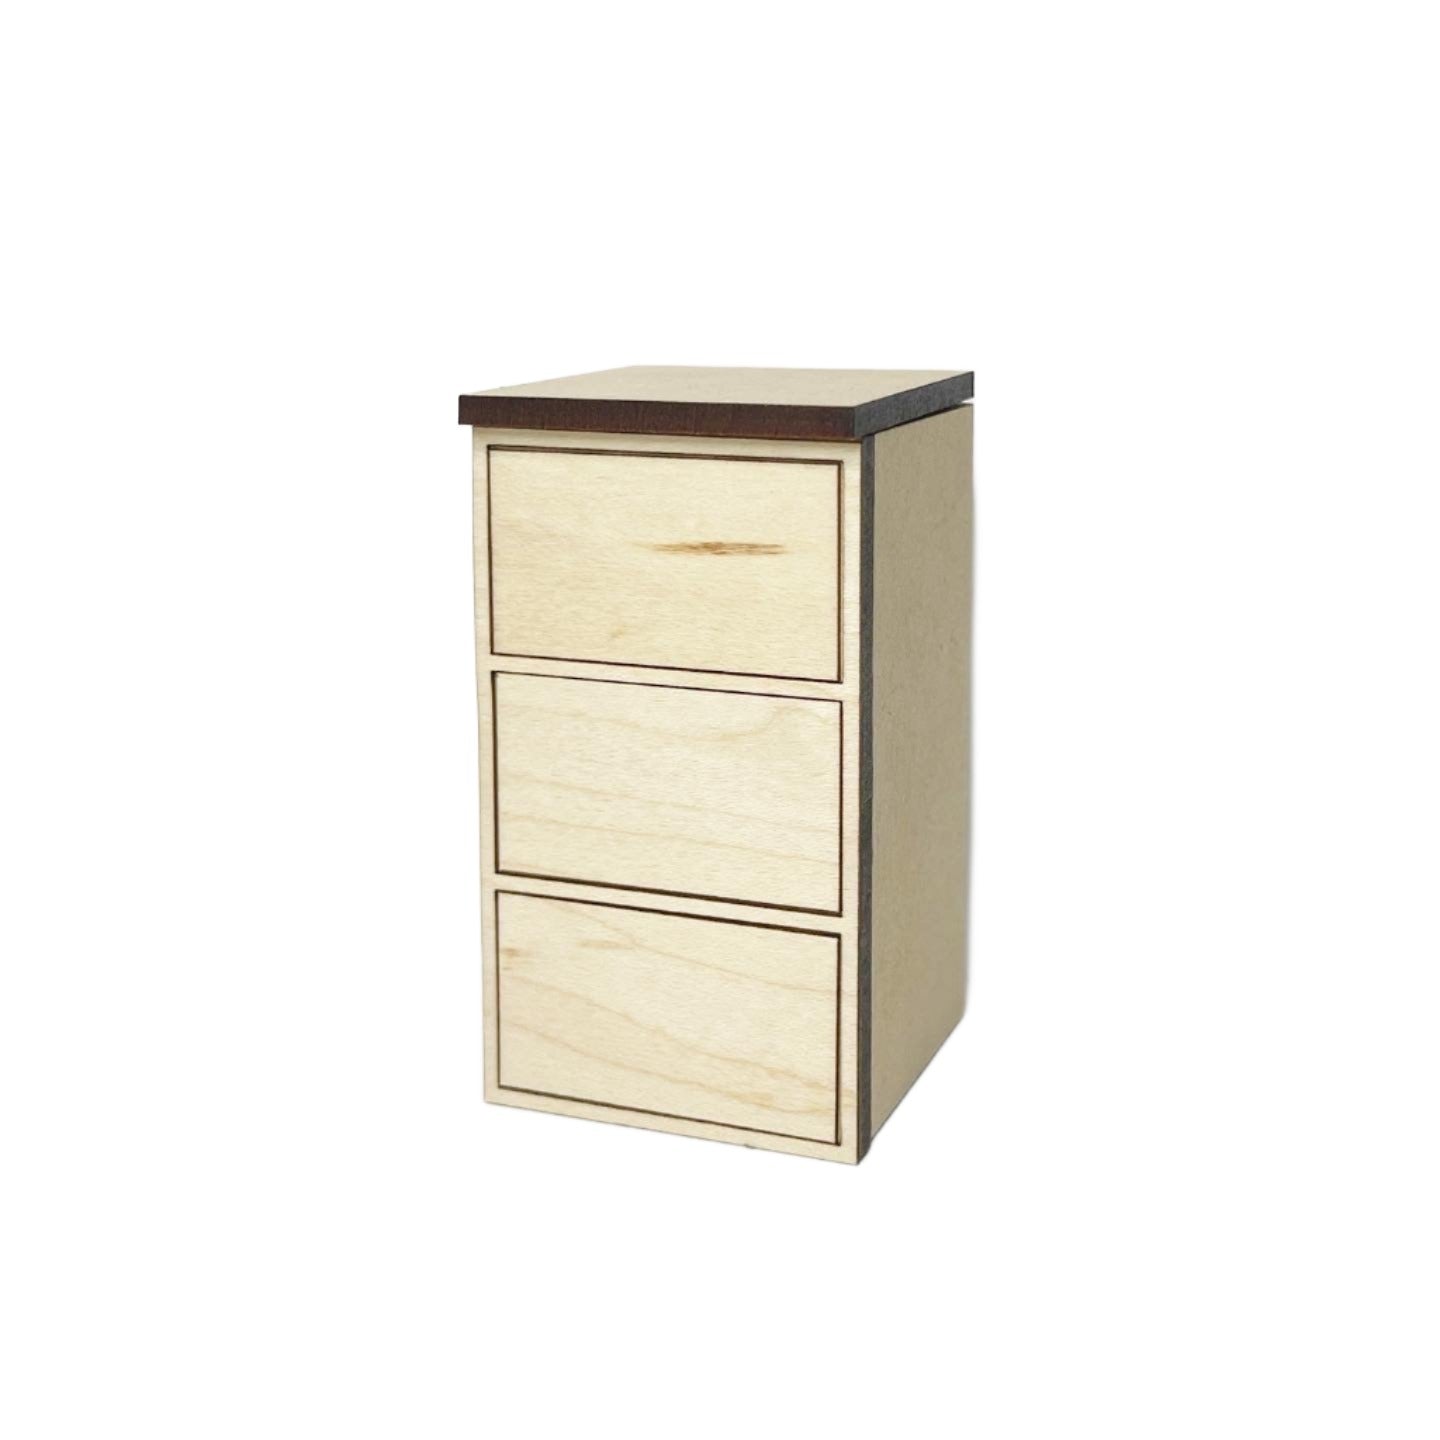 Single Lower Cabinet with Three Drawers, Standard